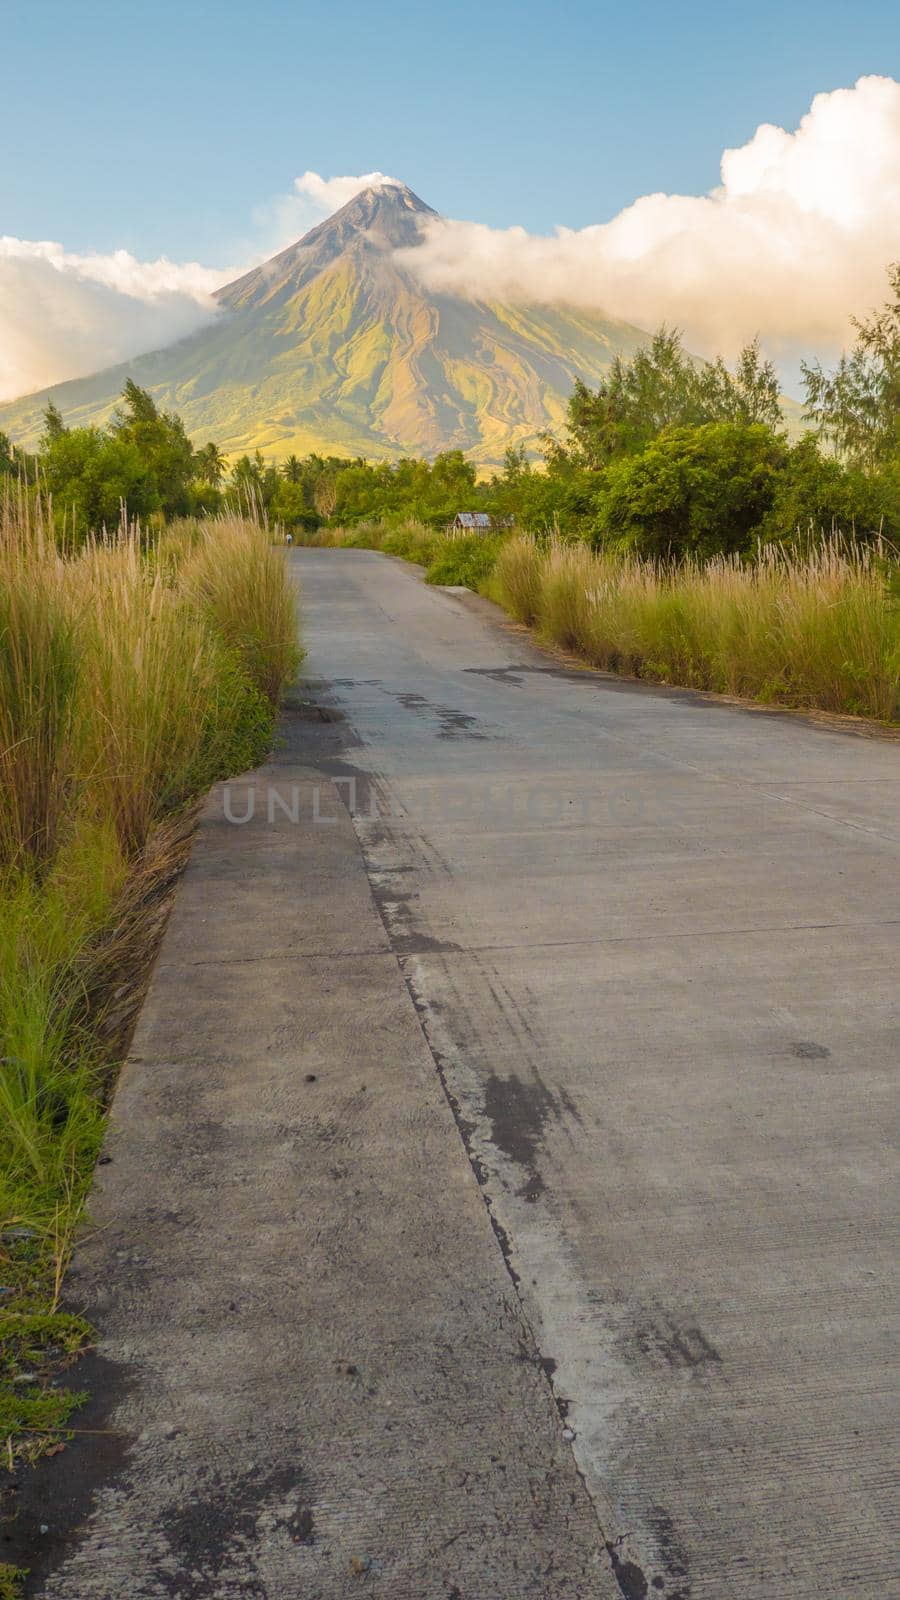 Mayon Volcano in Legazpi, Philippines. Mayon Volcano is an active volcano and rising 2462 meters from the shores of the Gulf of Albay. by DovidPro